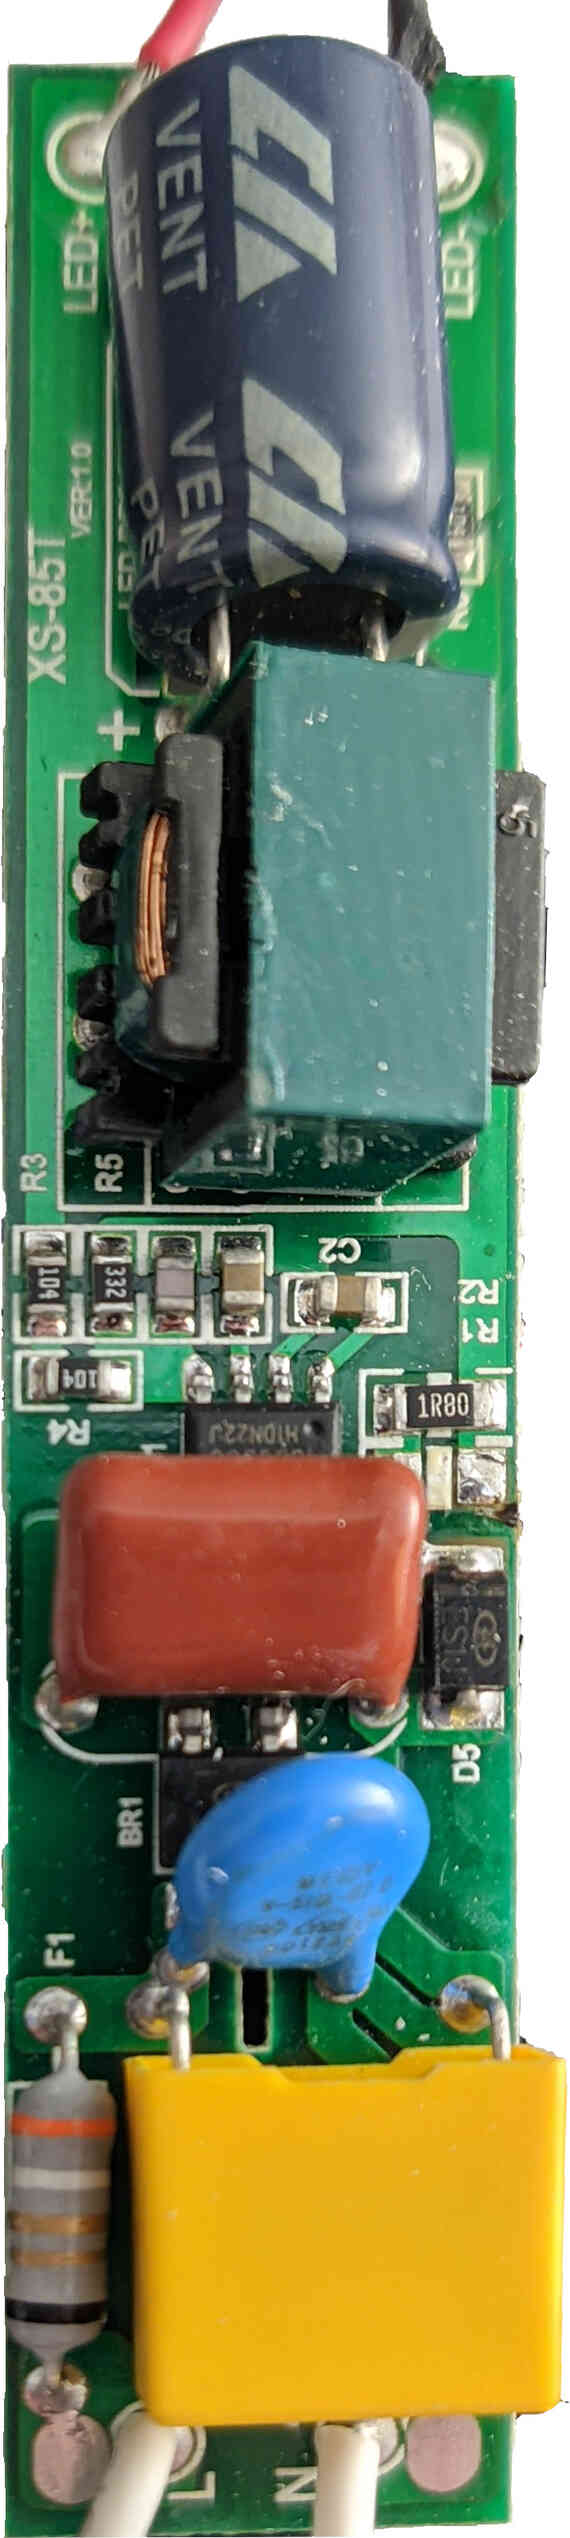 The circuit board for the fan constant-current power supply. This is a non-isolated power supply, and will go all the way up to line voltage if there is no load.